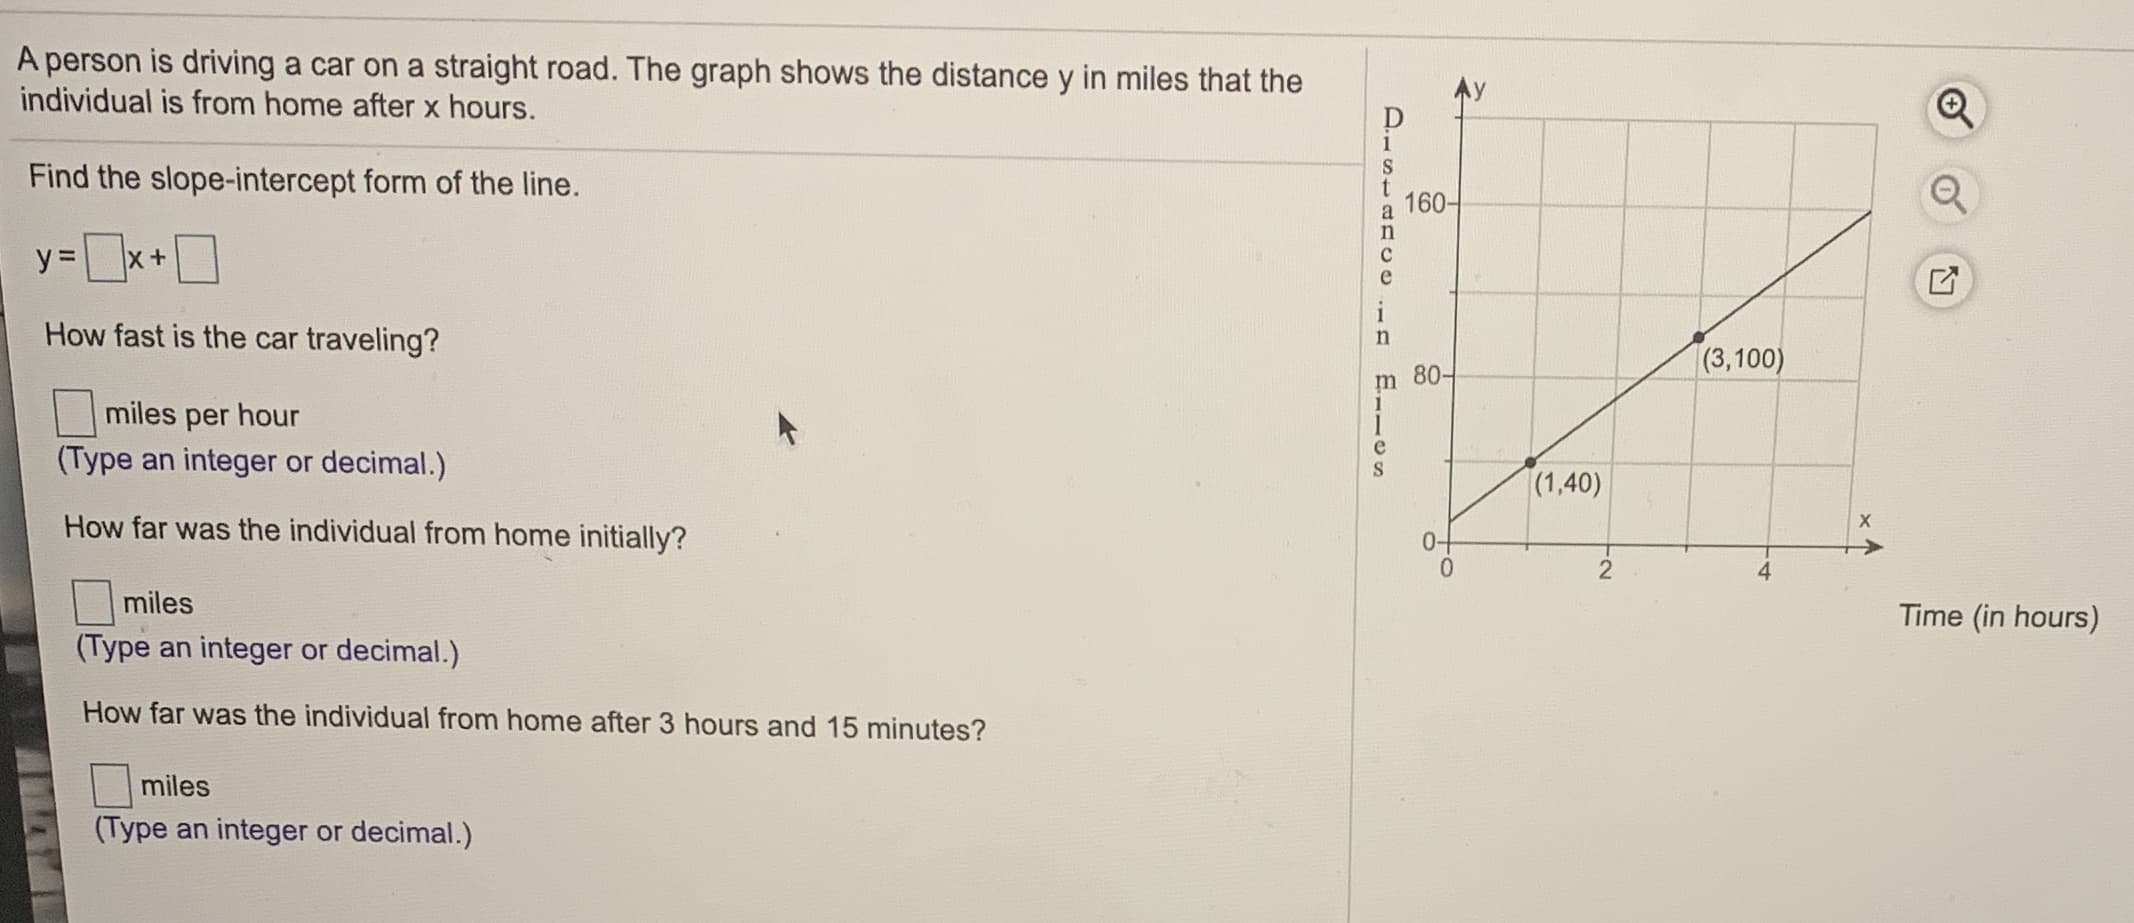 A person is driving a car on a straight road. The graph shows the distance y in miles that the
individual is from home after x hours.
D
1
S
Find the slope-intercept form of the line.
160-
y=x+0
%3D
e
How fast is the car traveling?
|(3,100)
m 80-
miles per hour
(Type an integer or decimal.)
(1,40)
How far was the individual from home initially?
miles
Time (in hours)
(Type an integer or decimal.)
How far was the individual from home after 3 hours and 15 minutes?
miles
(Type an integer or decimal.)
